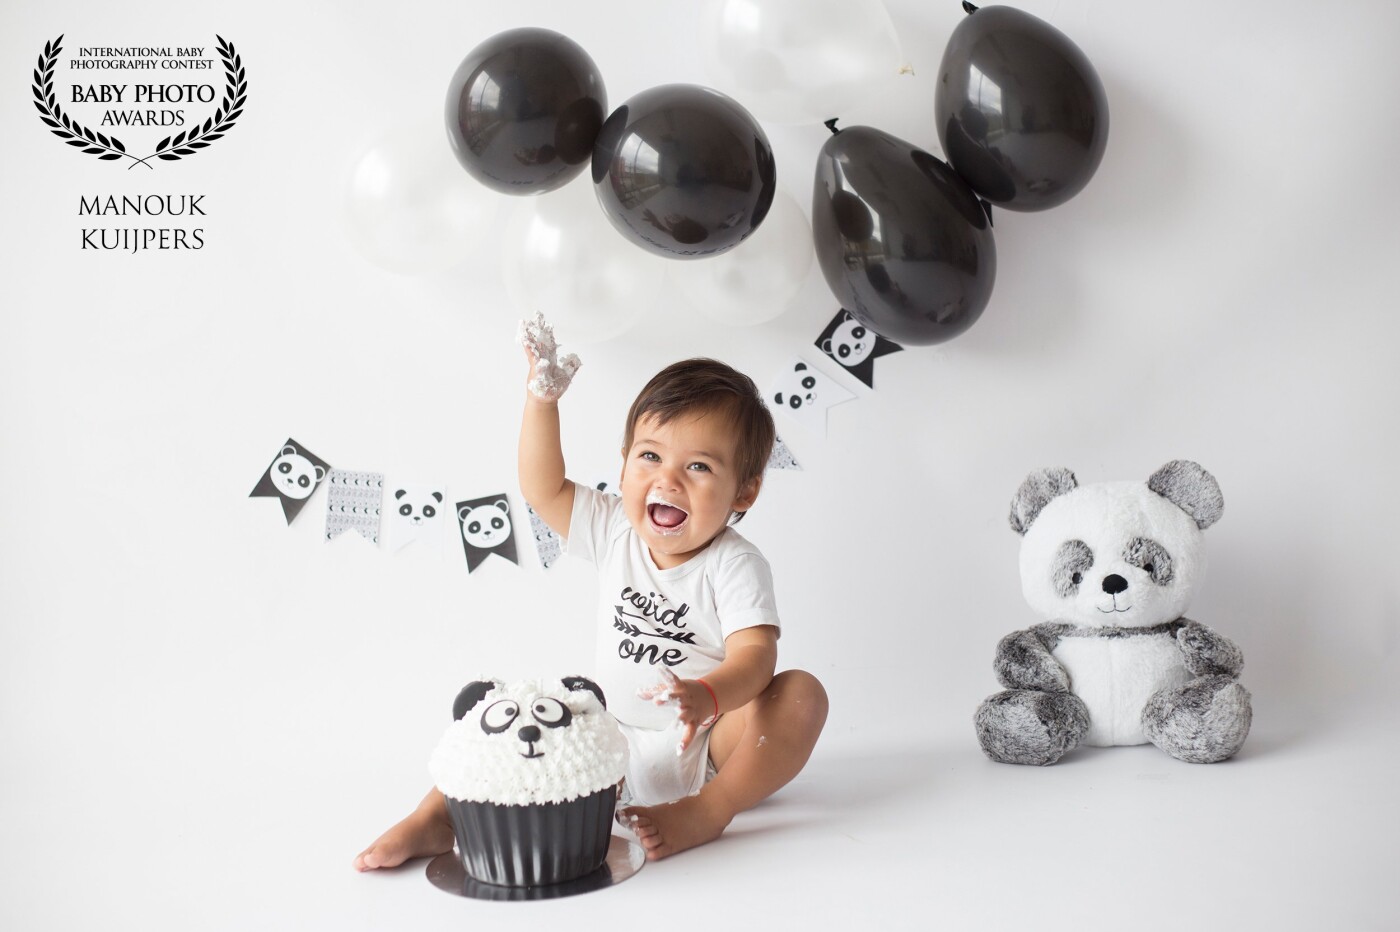 This little man was so happy during his whole photoshoot. He had no problem at all getting dirty from the whipped cream! I really love the panda theme for his cakesmash!